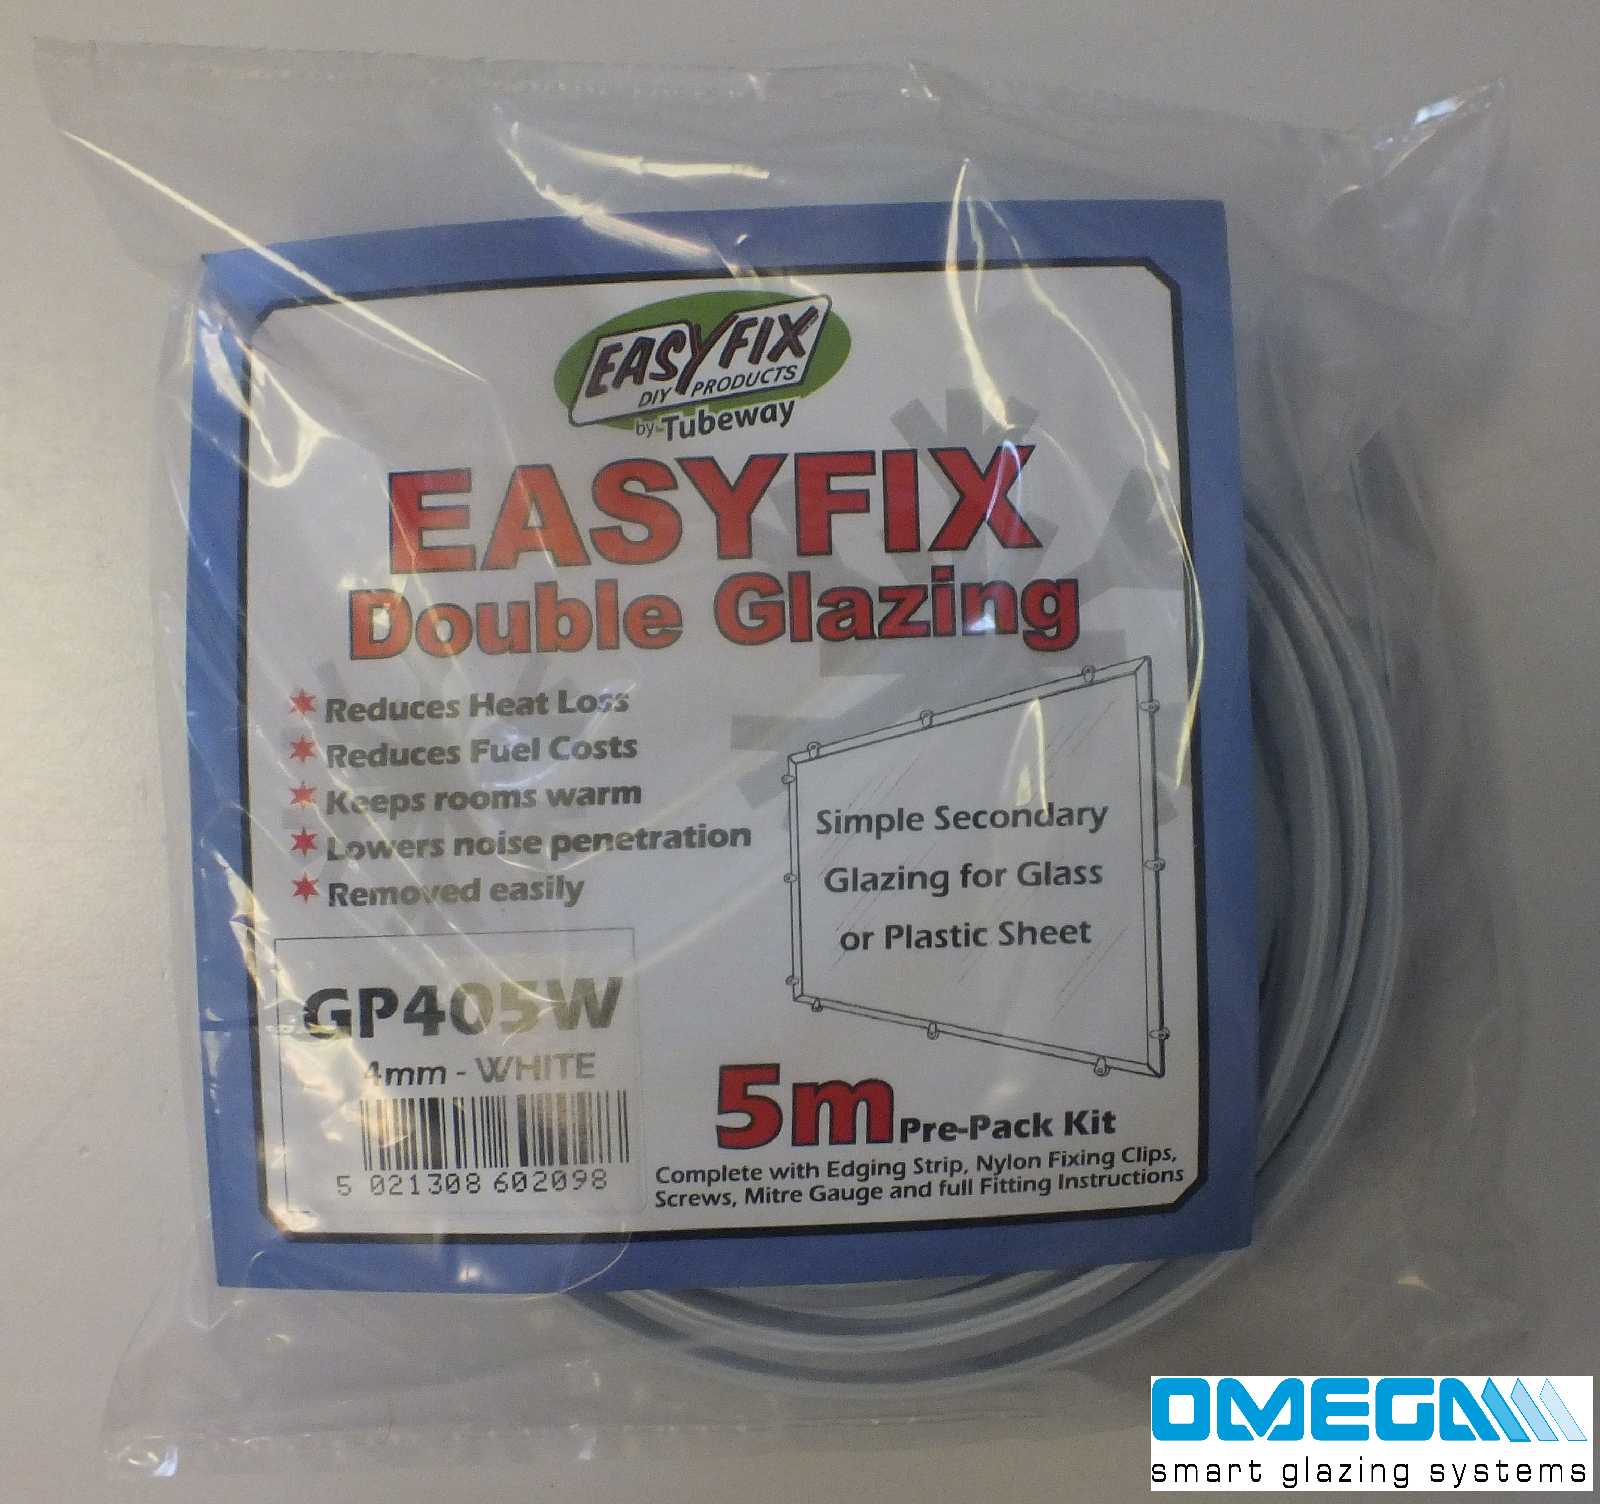 Easyfix Clipglaze Edging Kit - 5m roll of edging for 3mm Glazing Thickness, White, Clear or Brown